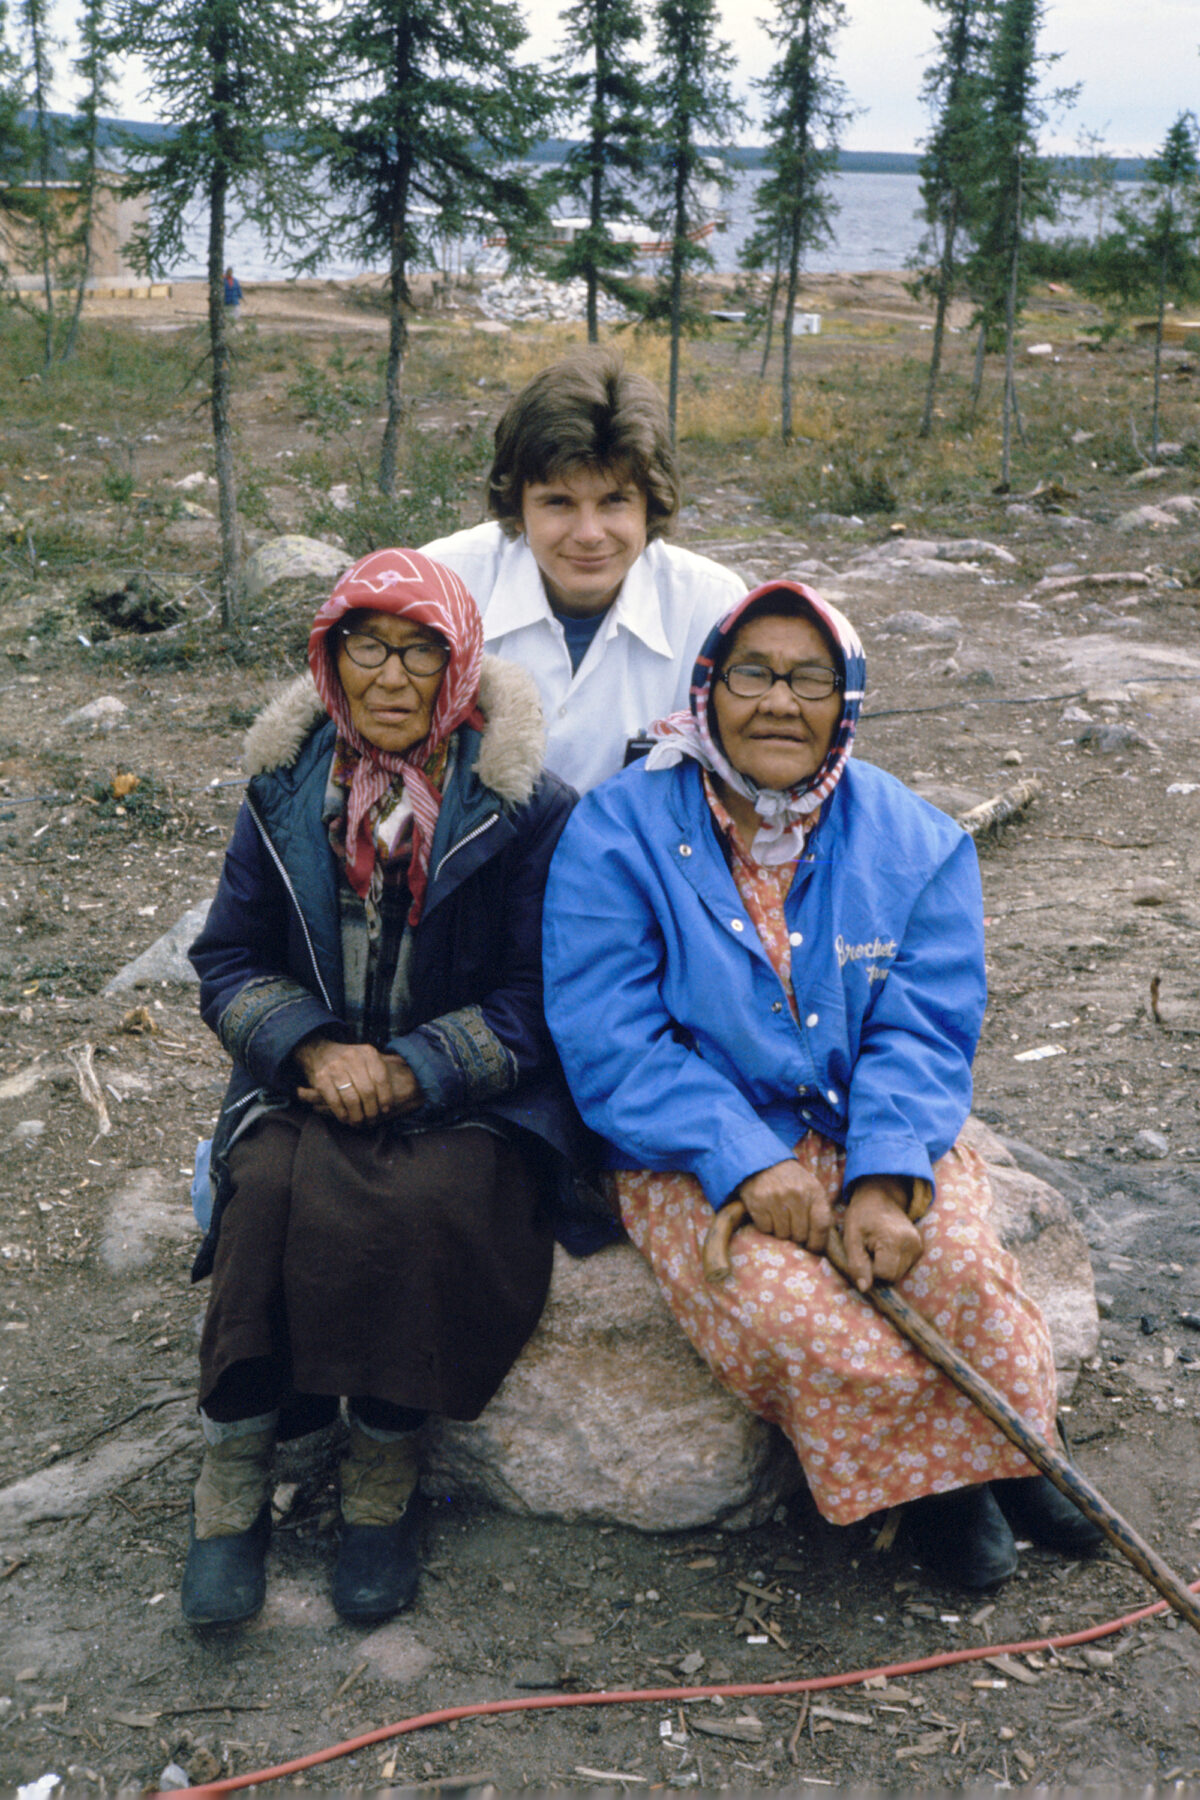 Two elderly women sitting on a rock outside by a lake, with another person crouched behind them.